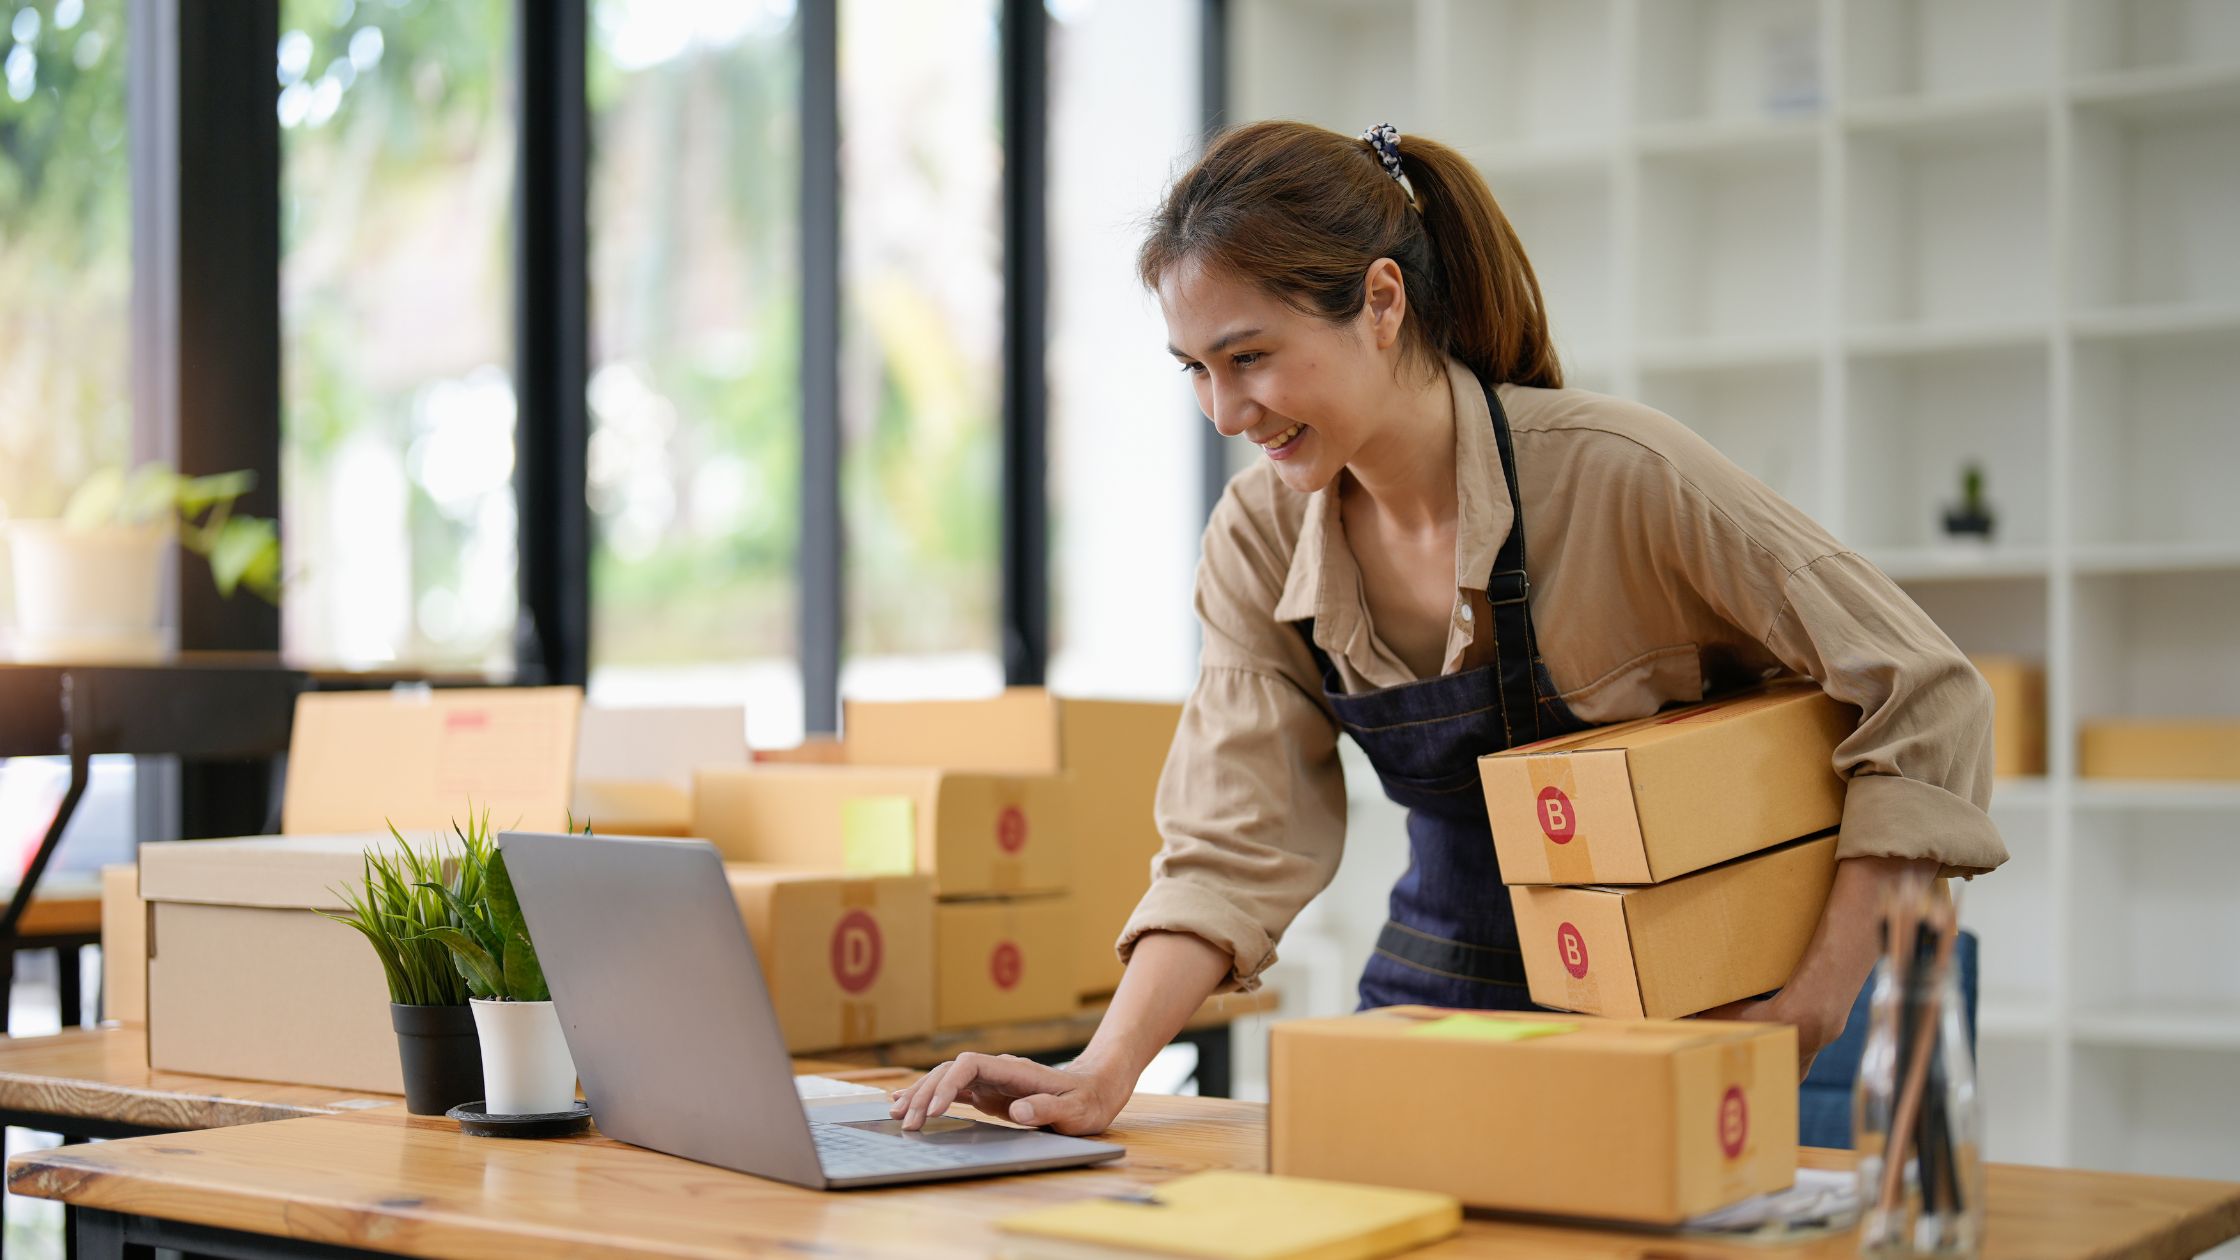 Shipping Supplies to Boost Your Business